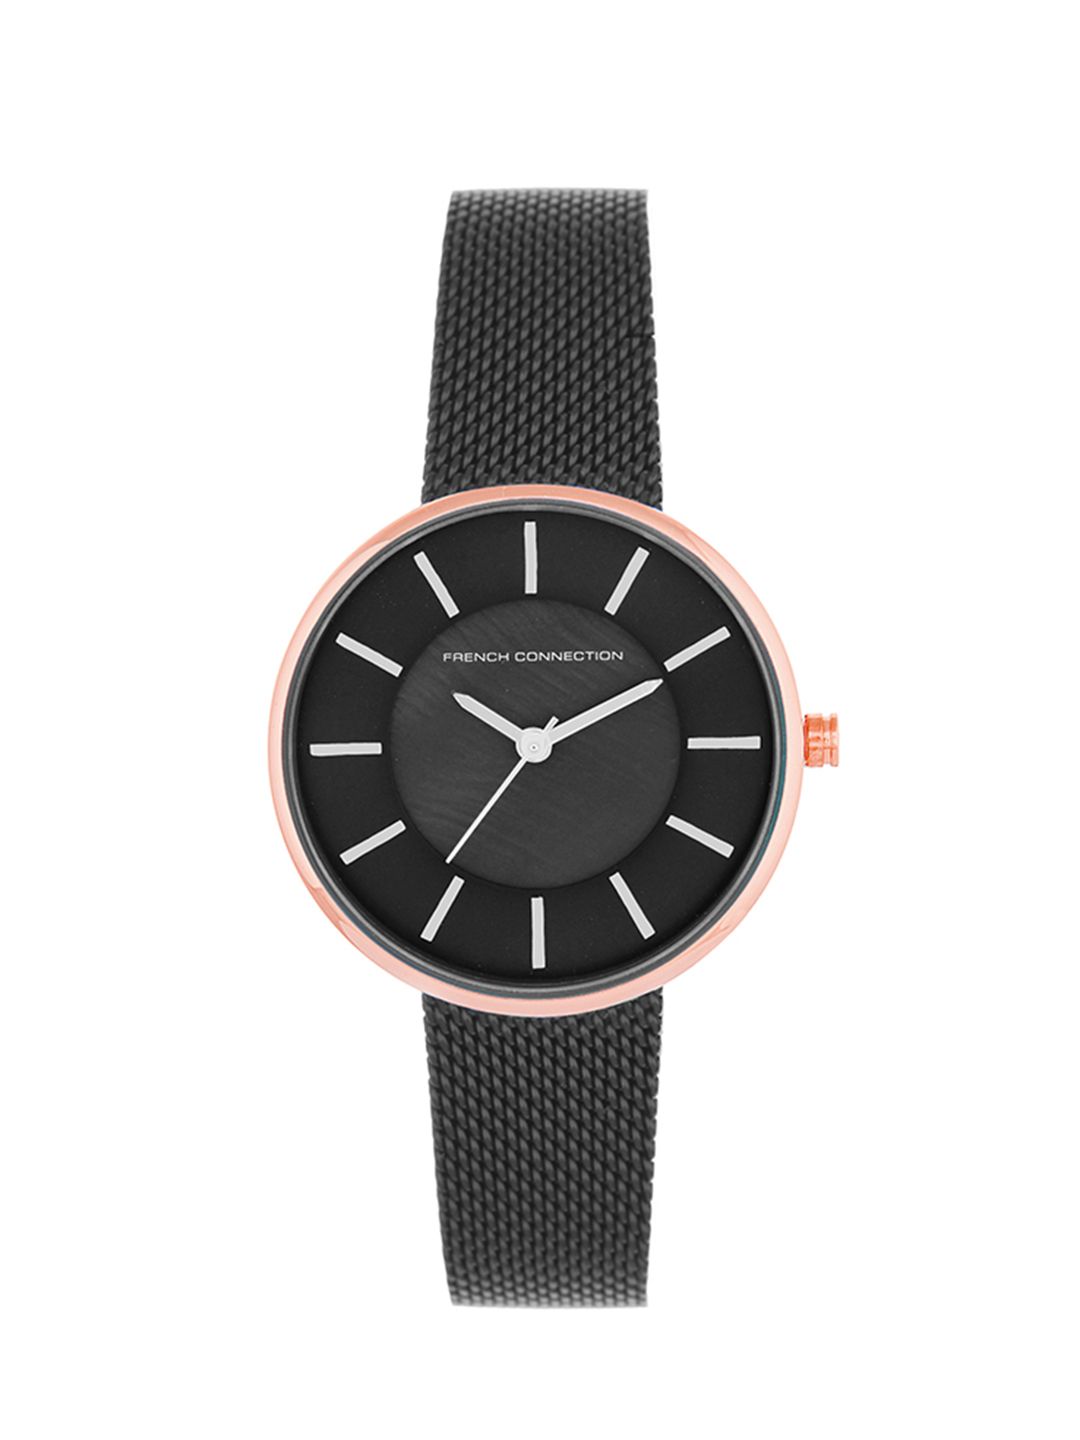 French Connection Women Black Dial & Stainless Steel Analogue Watch - FCN0005F Price in India